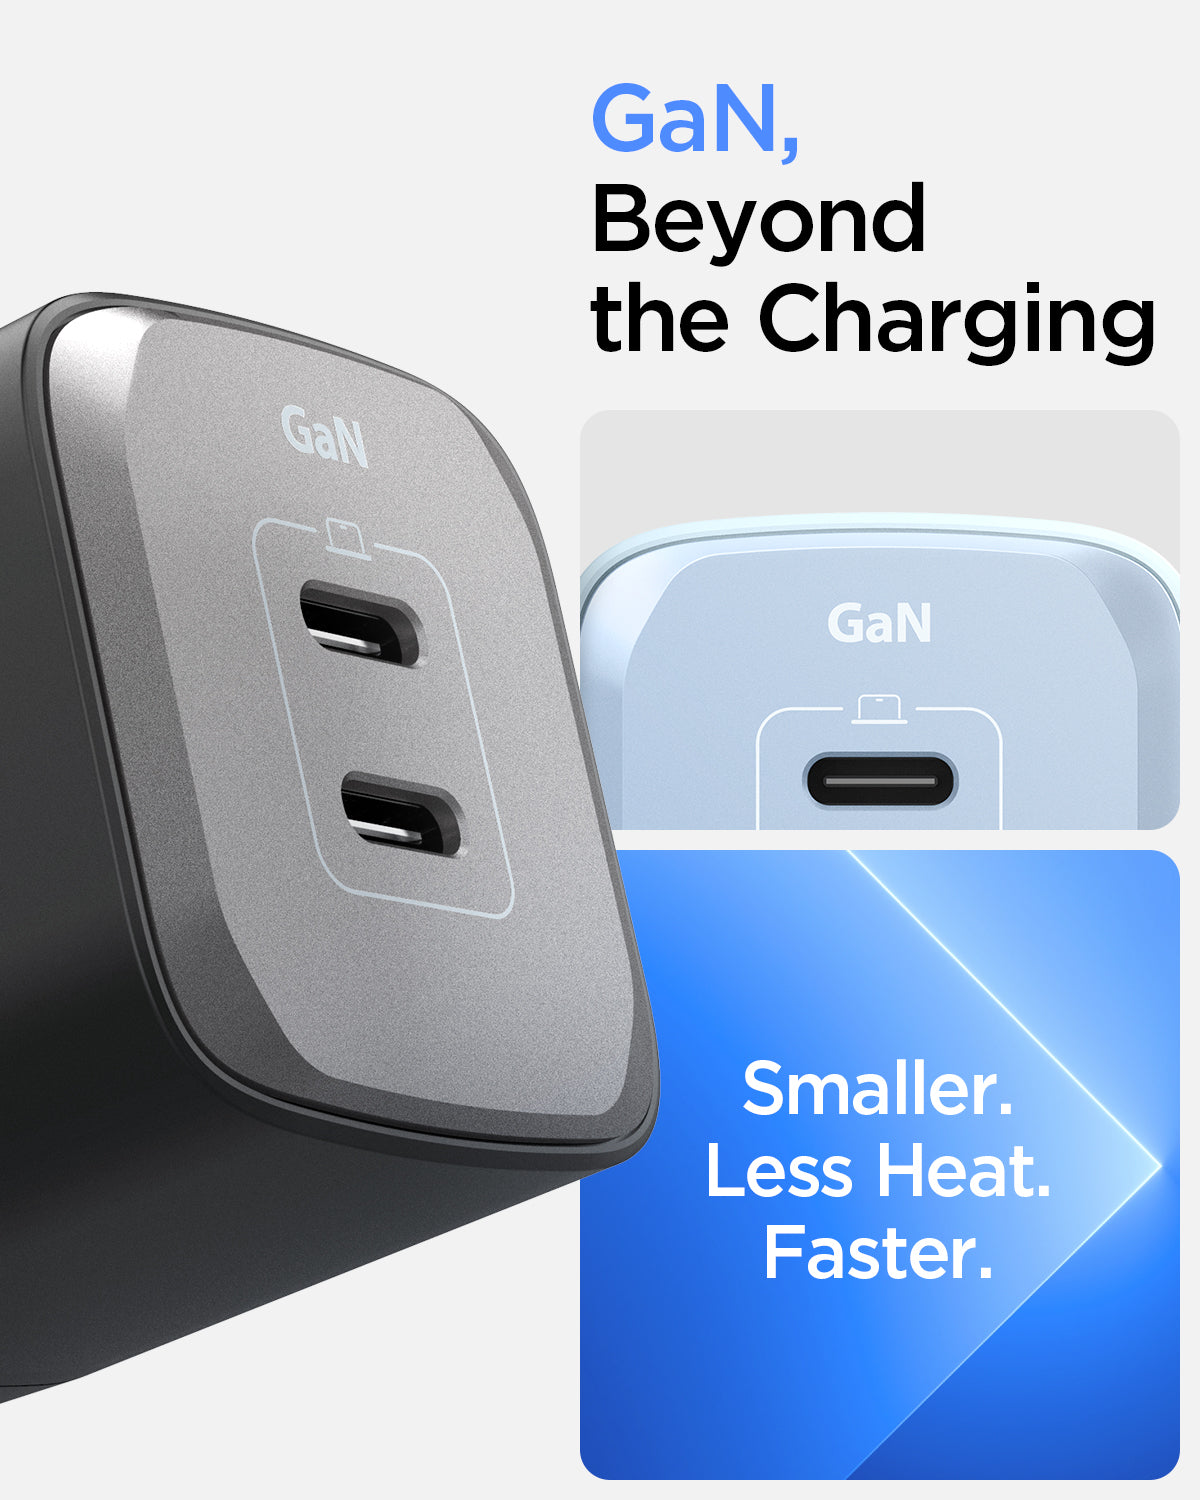 ACH05160 - ArcStation™ Pro GaN 652 Dual USB-C Wall Charger PE2204 in Midnight Black showing the Logo GaN, Beyond the Charging, a half top part of a light blue charger with the words below Smaller. Less Heat. Faster, and beside it a much bigger top, and partial sides of a wall charger